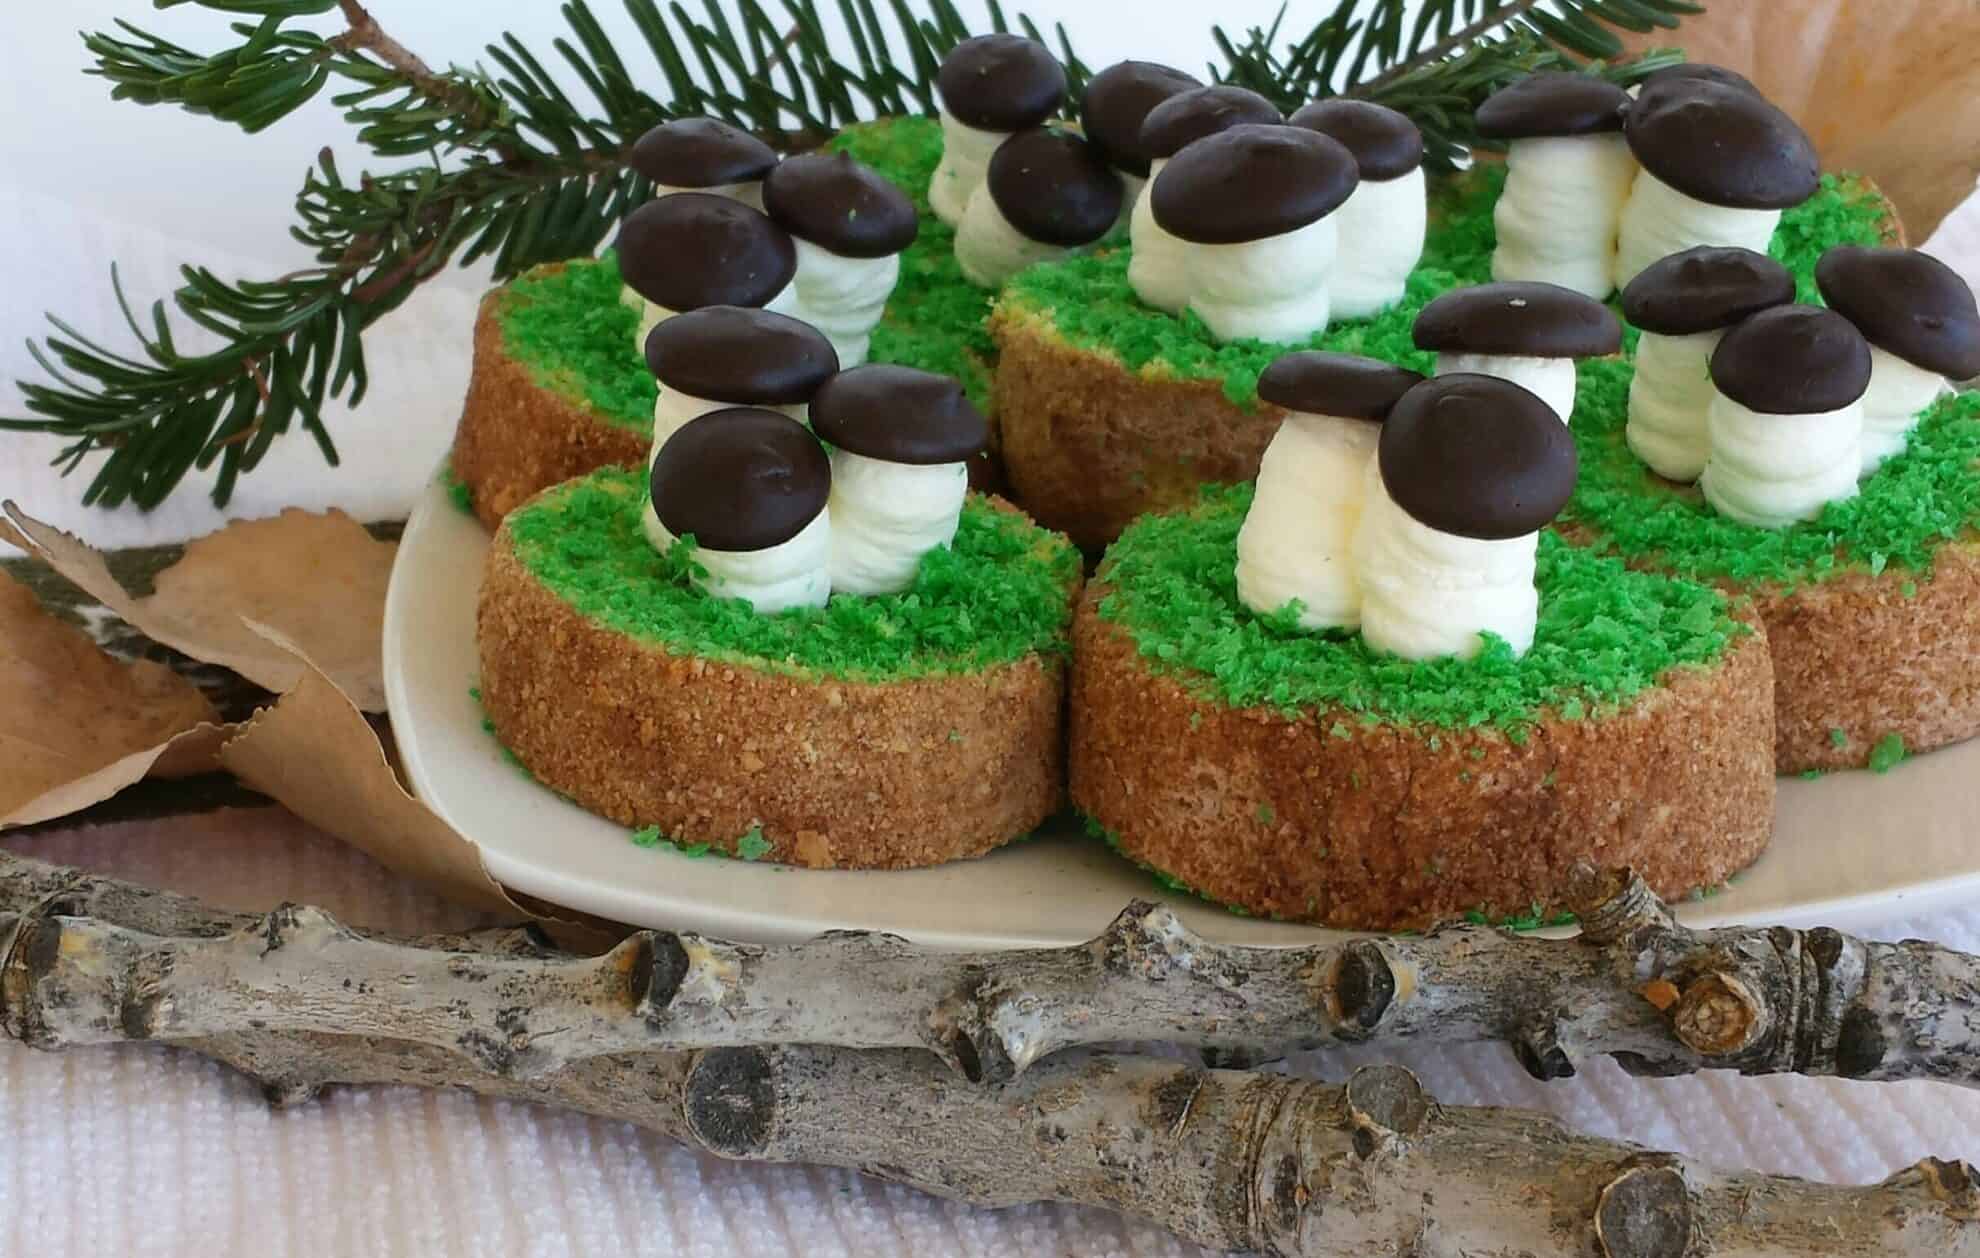 Isn't it a mushroom season now? These decorative desserts are mushrooms growing on top of an old stump in the forest. That chocolate cream inside the roll, the white cream of the mushroom stem and chocolate mushroom head make the taste unforgettable and crave-able. #oldstumpdessert #fallbaking #beautifuldessert